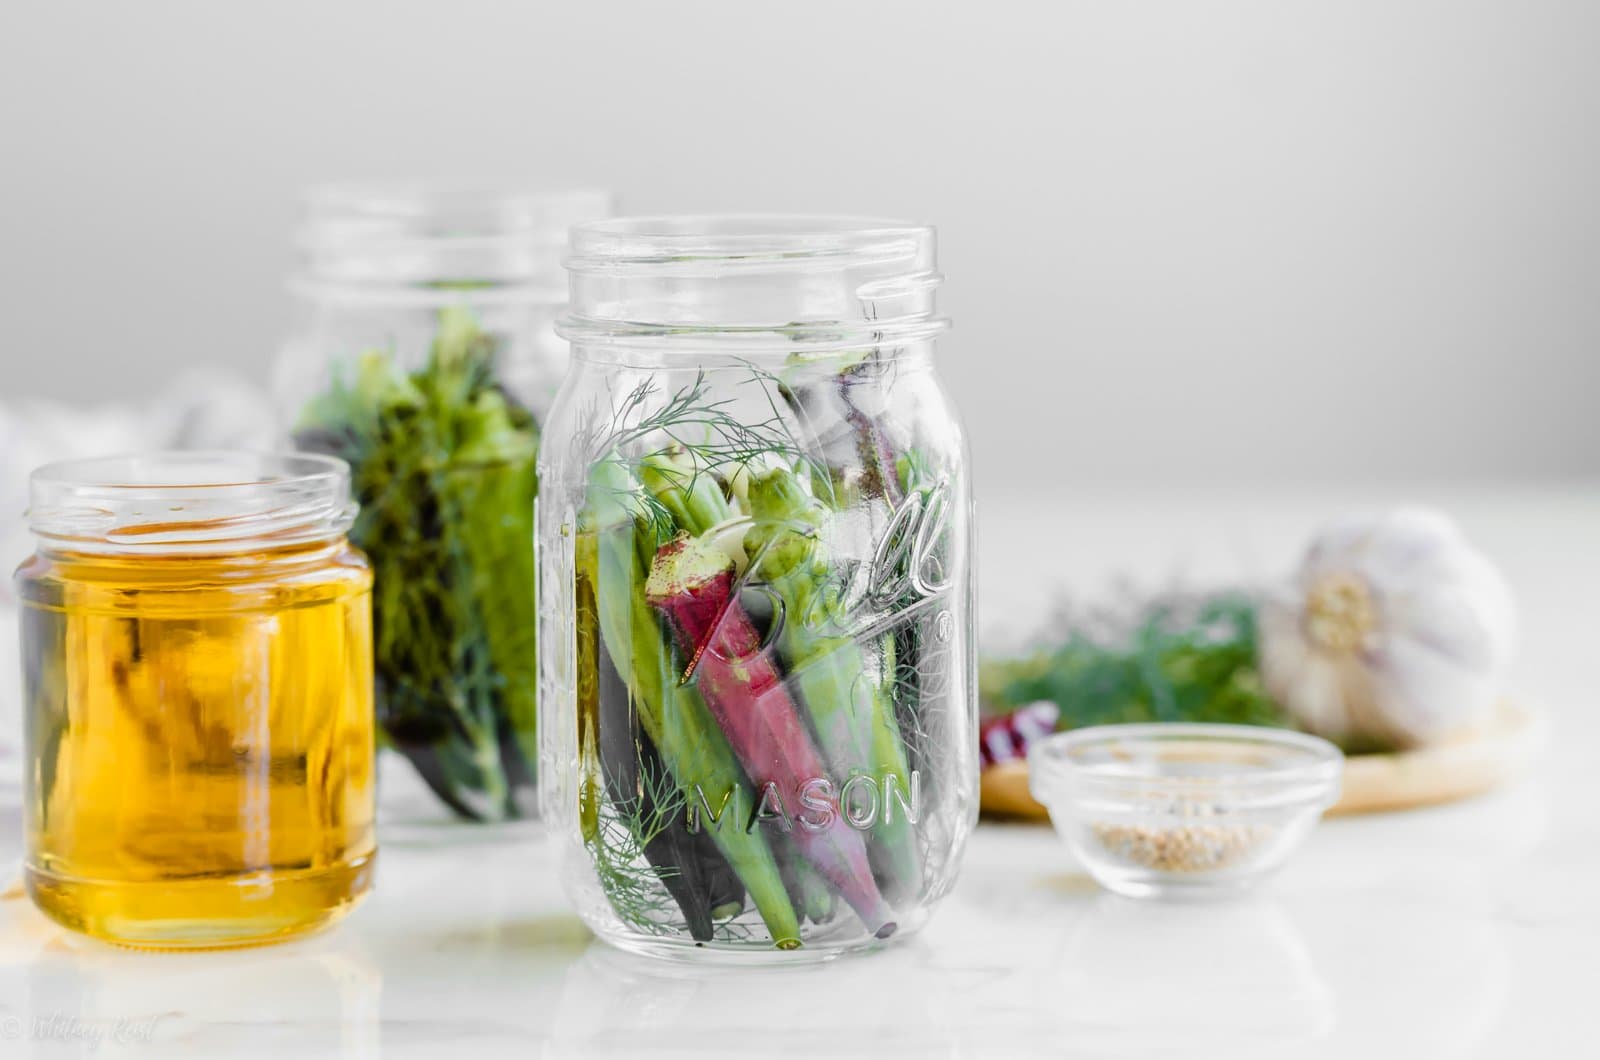 A canning jar with fresh okra with apple cider vinegar, garlic, and dill on the side.